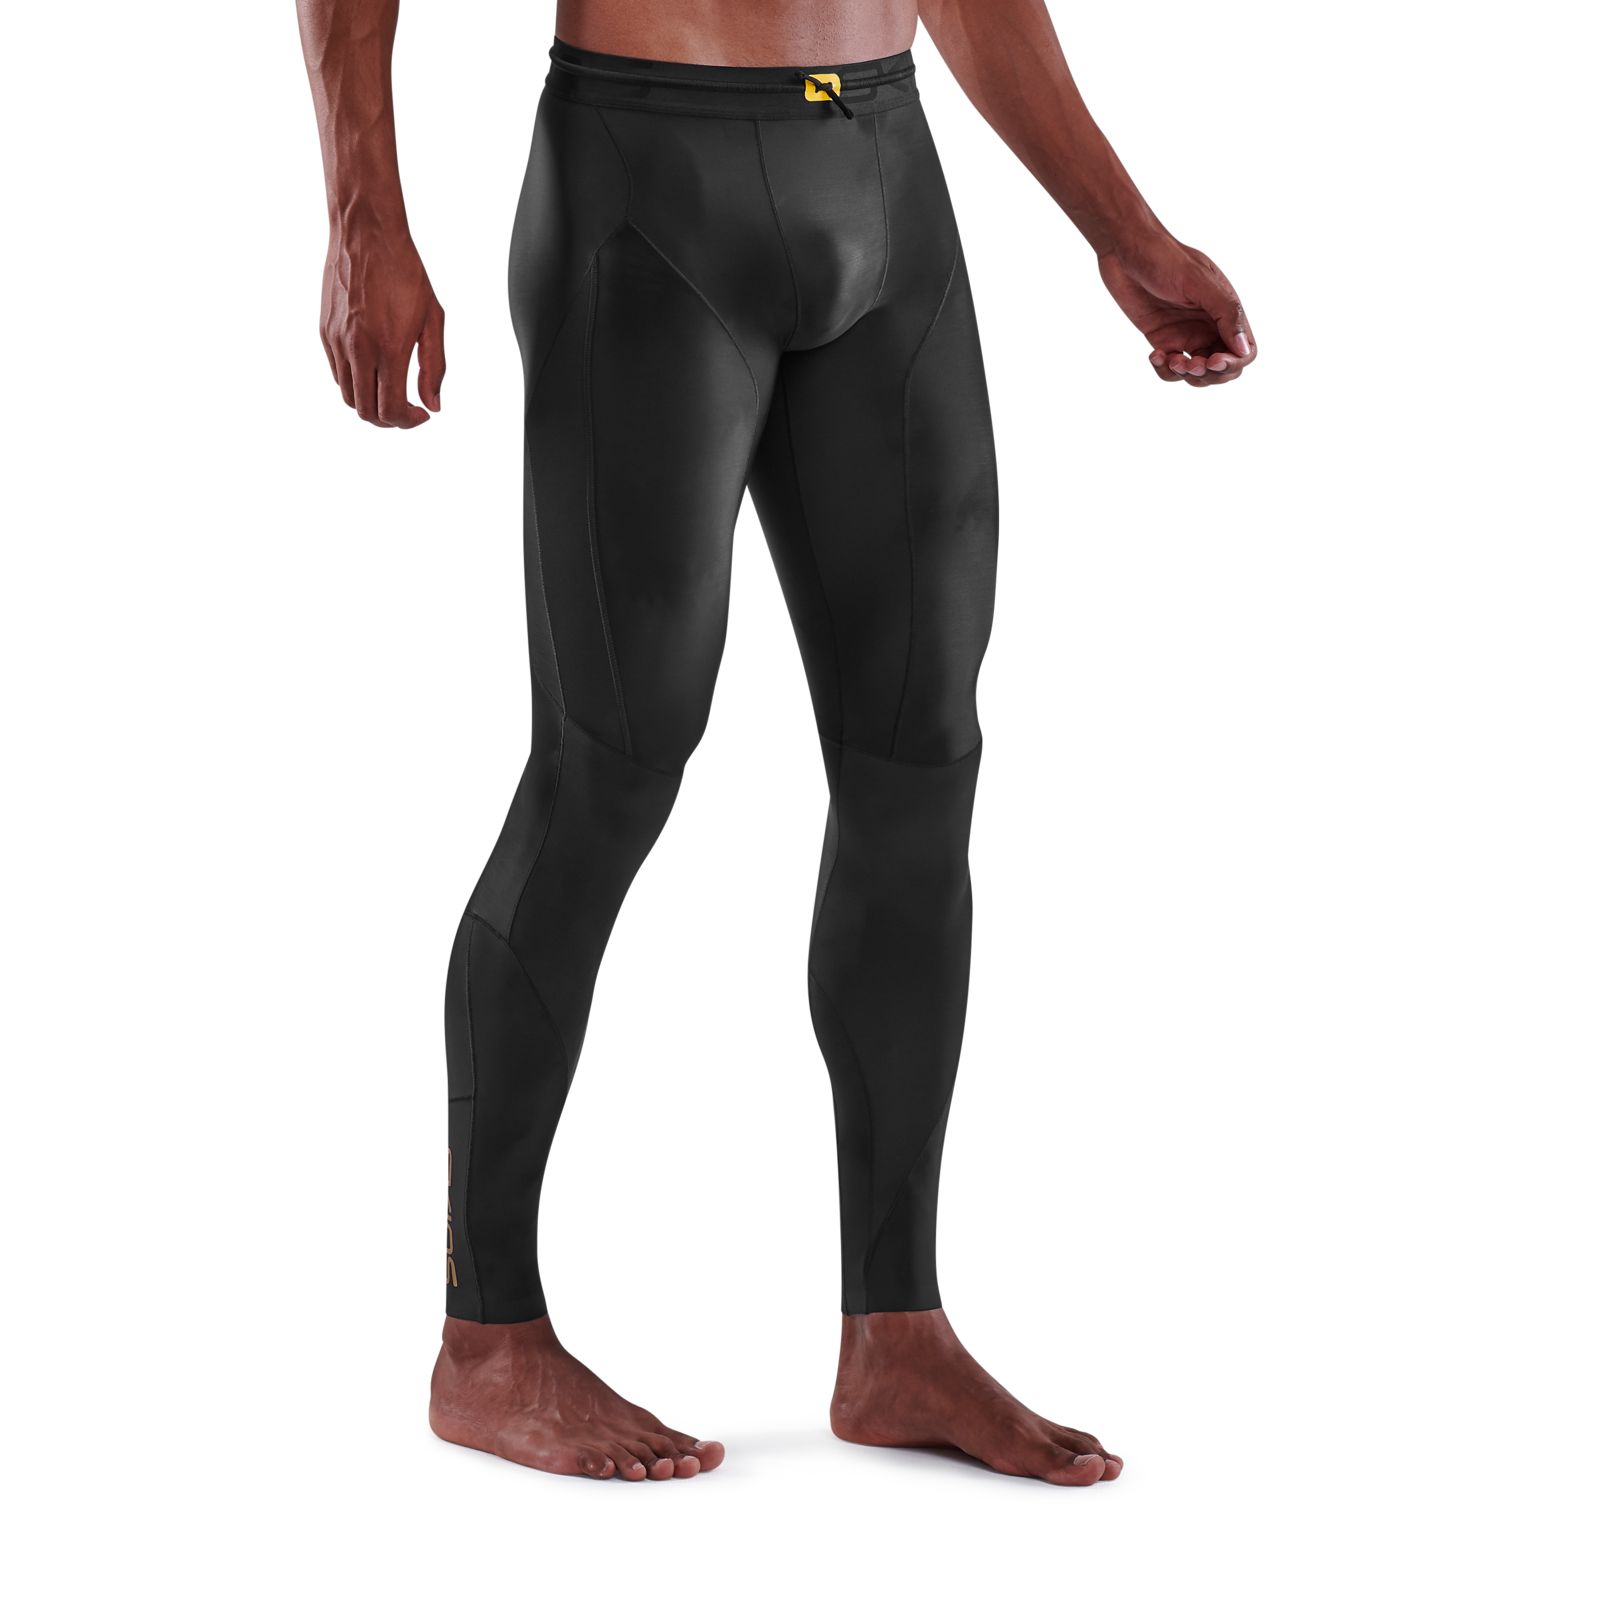 Skins Travel and Recovery Compression Tights in Black with Blue Stitching  size ML